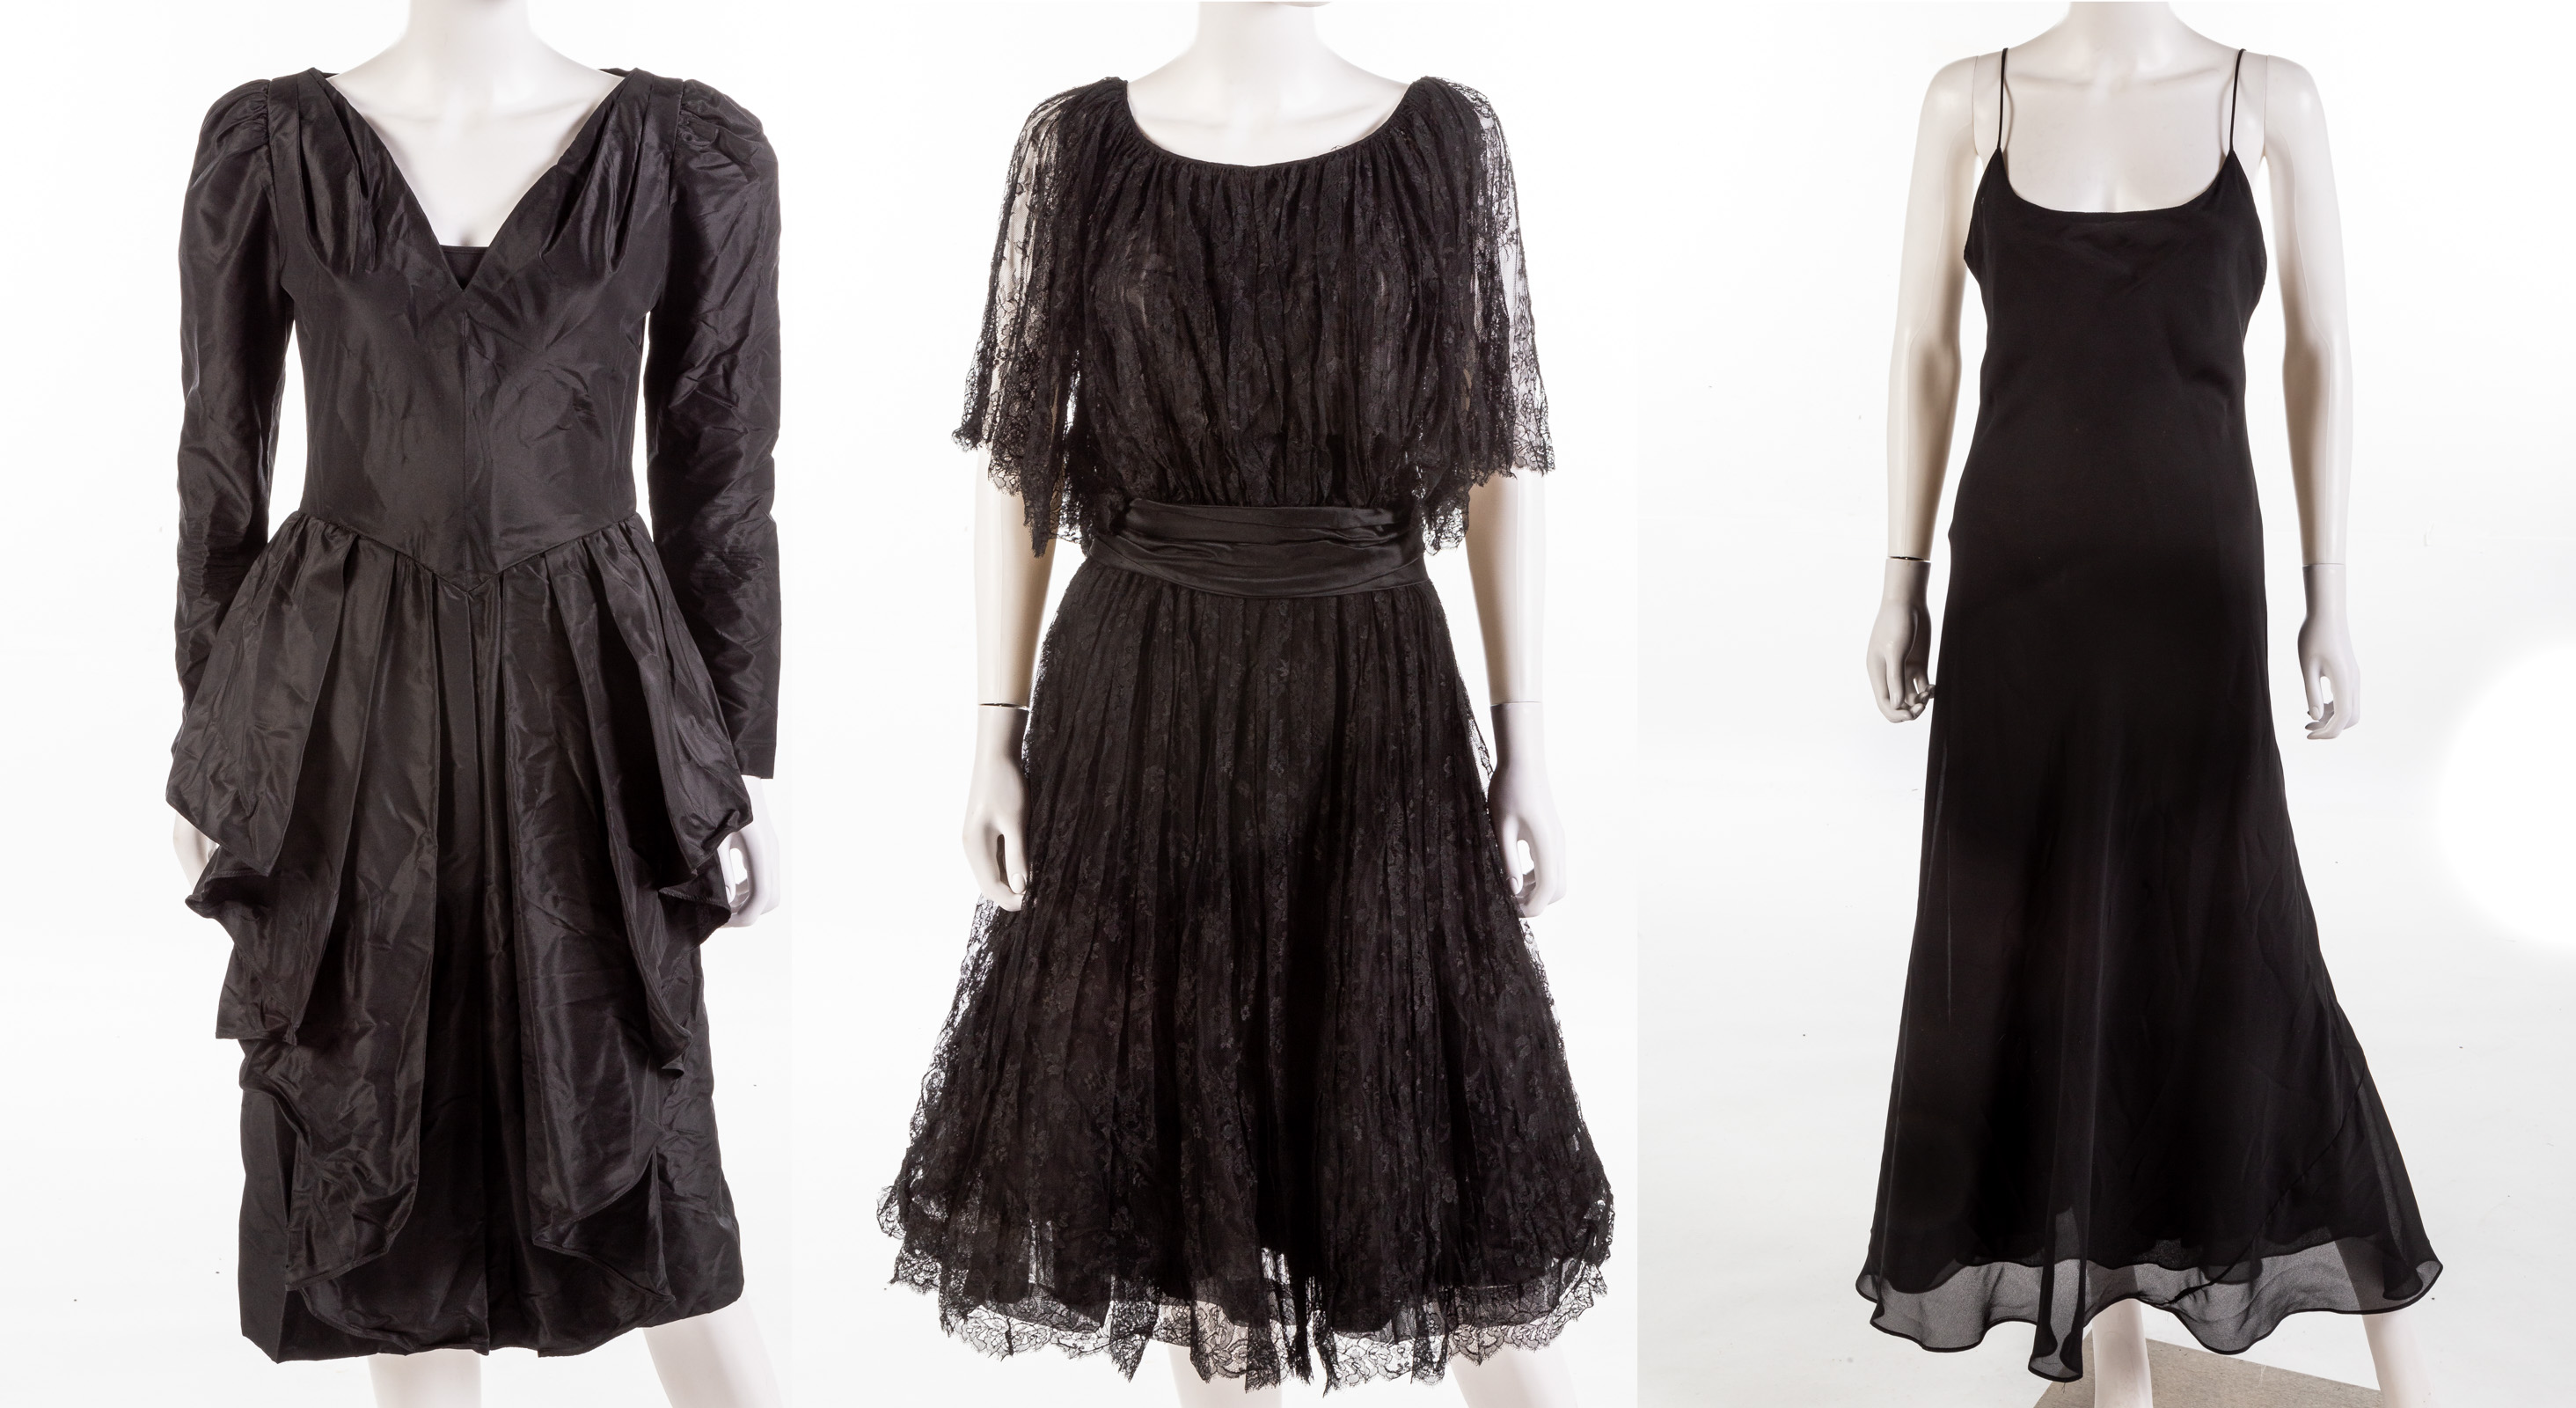 COLLECTION OF BLACK DRESSES Lace 337469